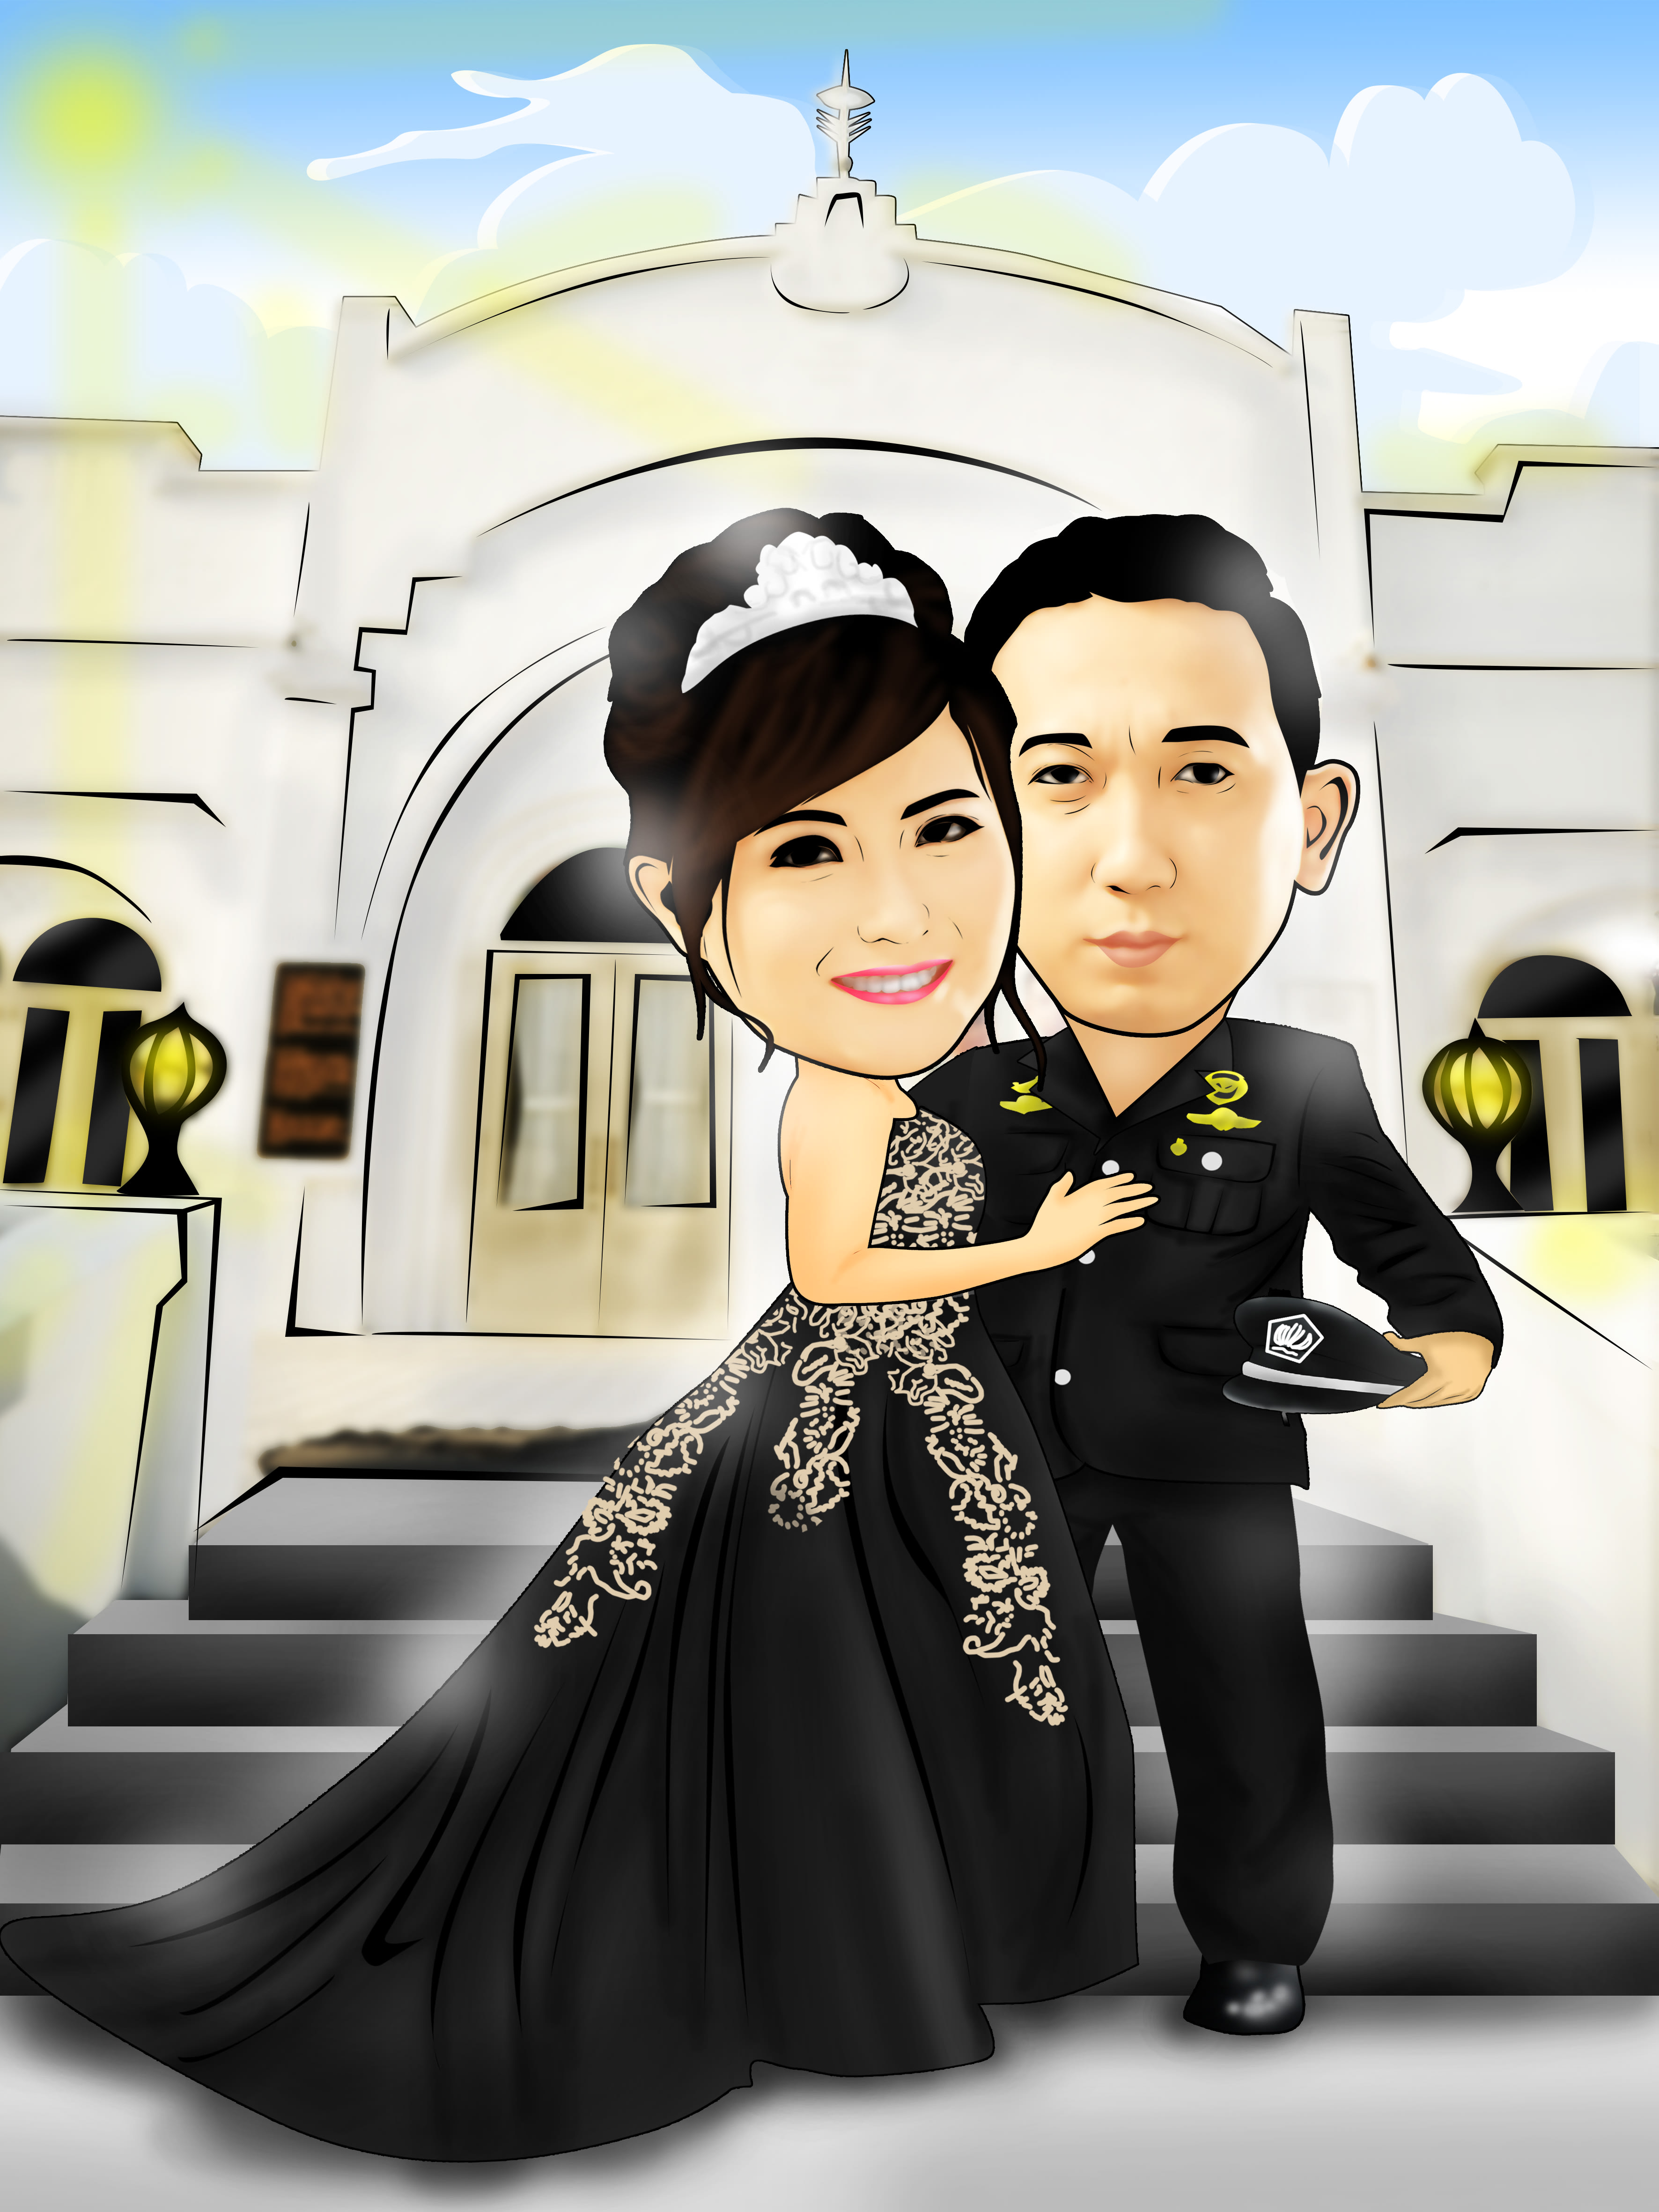 Amazing funny wedding and couple caricature by Idegrafis | Fiverr